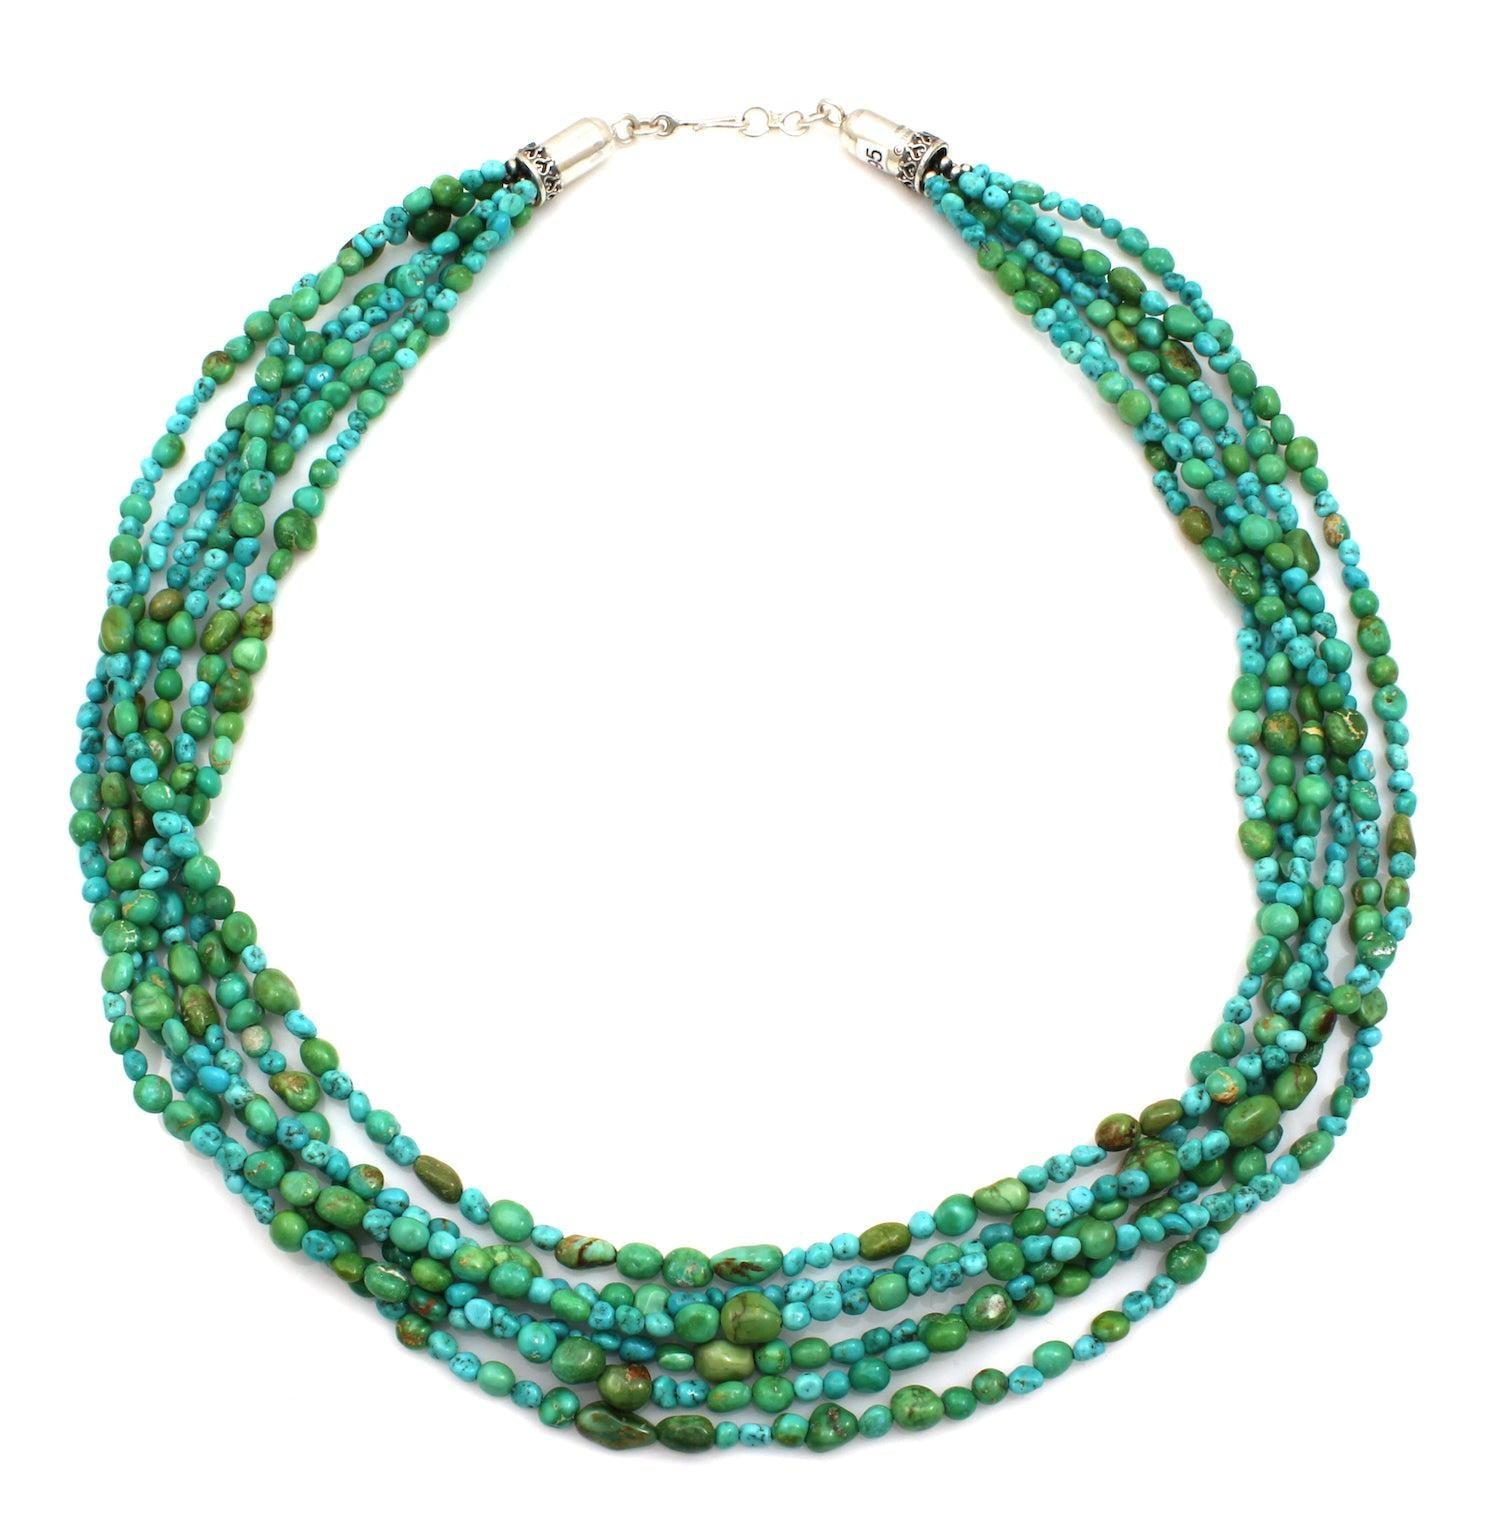 6 Strand Turquoise Necklace-Jewelry-Don Lucas-Sorrel Sky Gallery